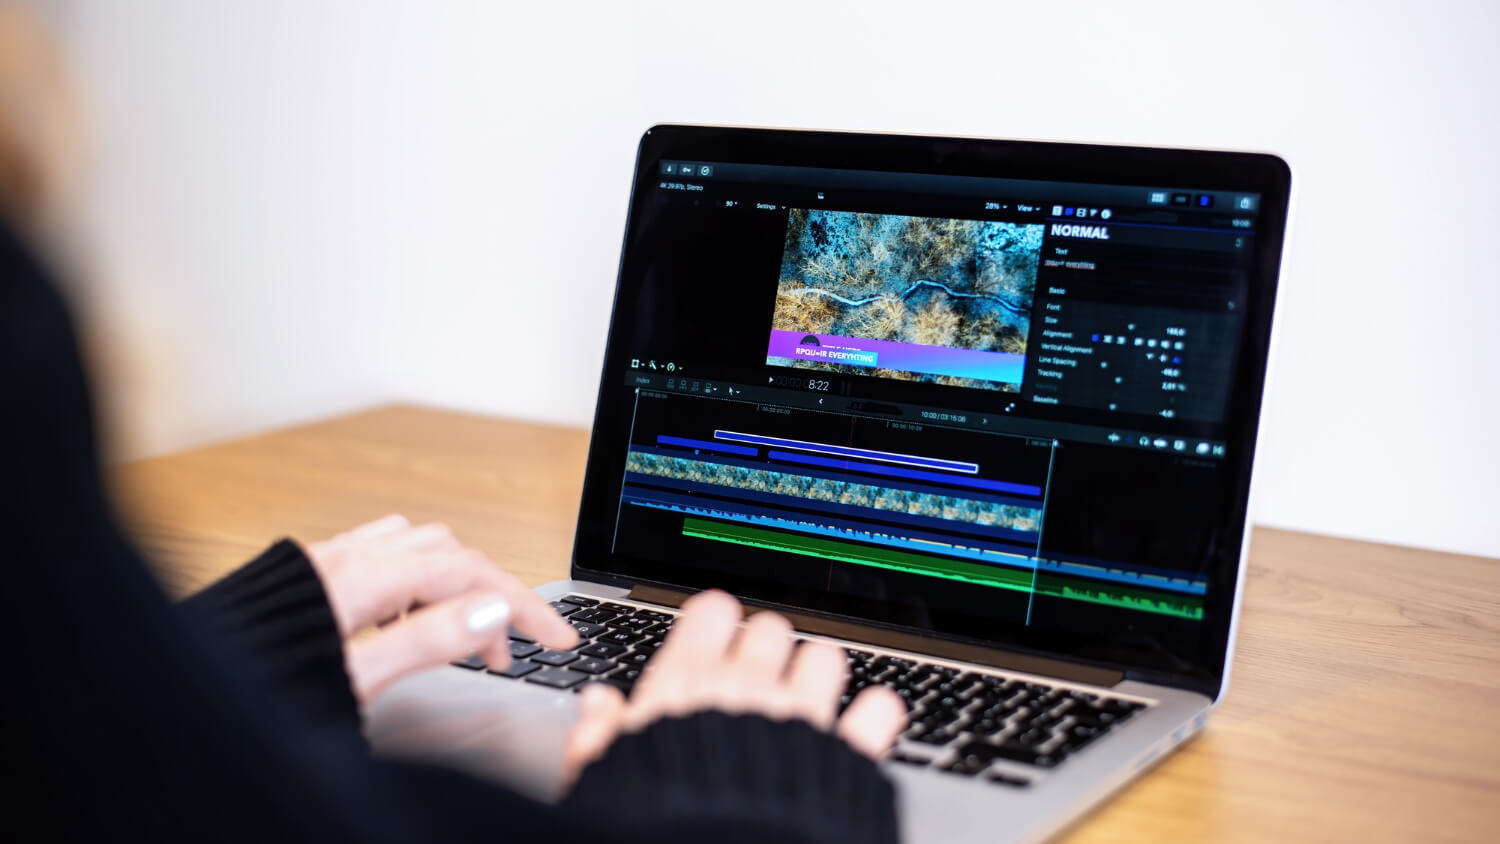 5 methods to improve the quality of your videos